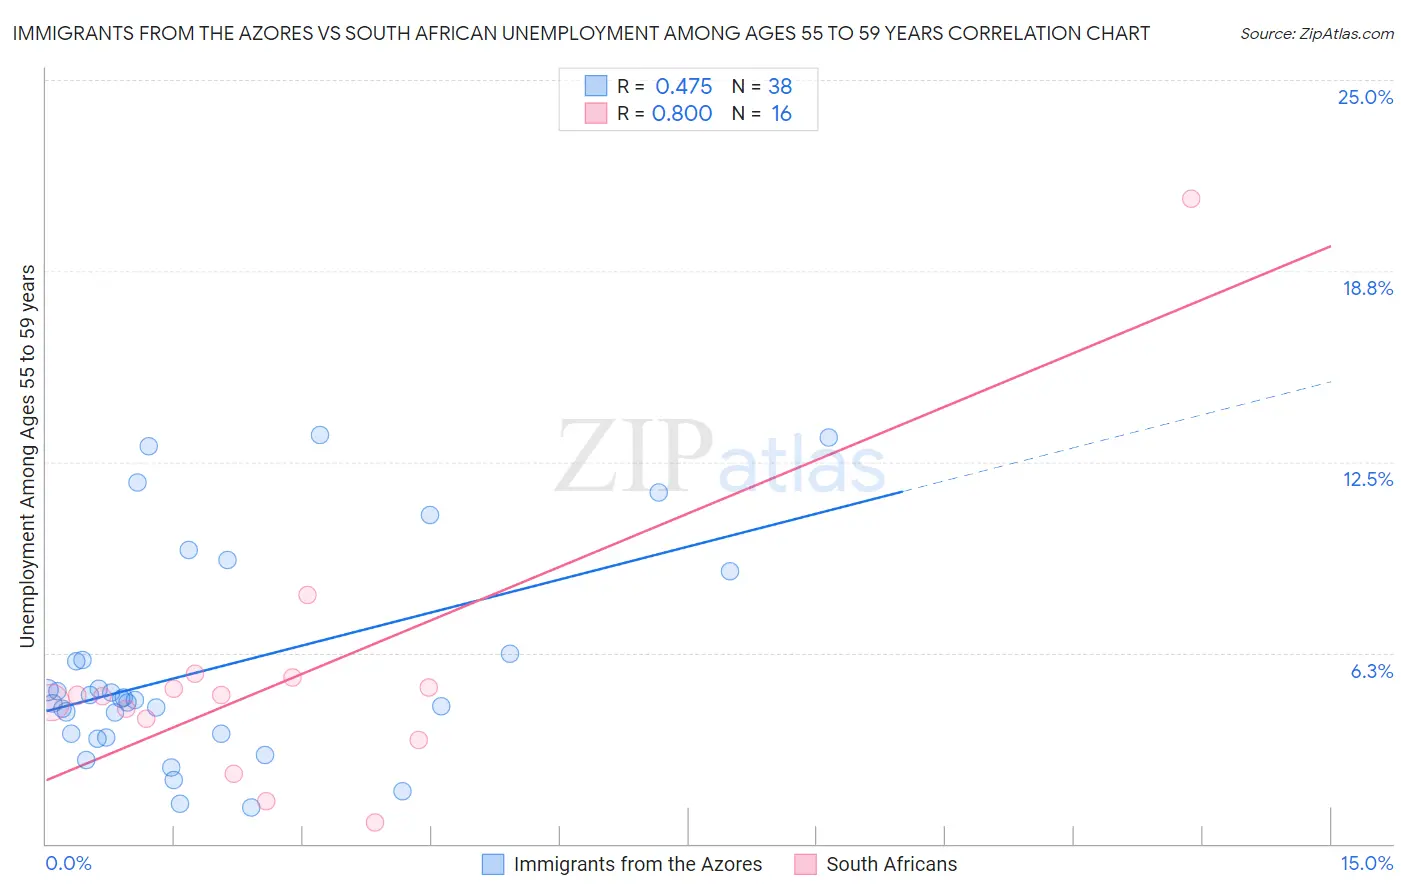 Immigrants from the Azores vs South African Unemployment Among Ages 55 to 59 years